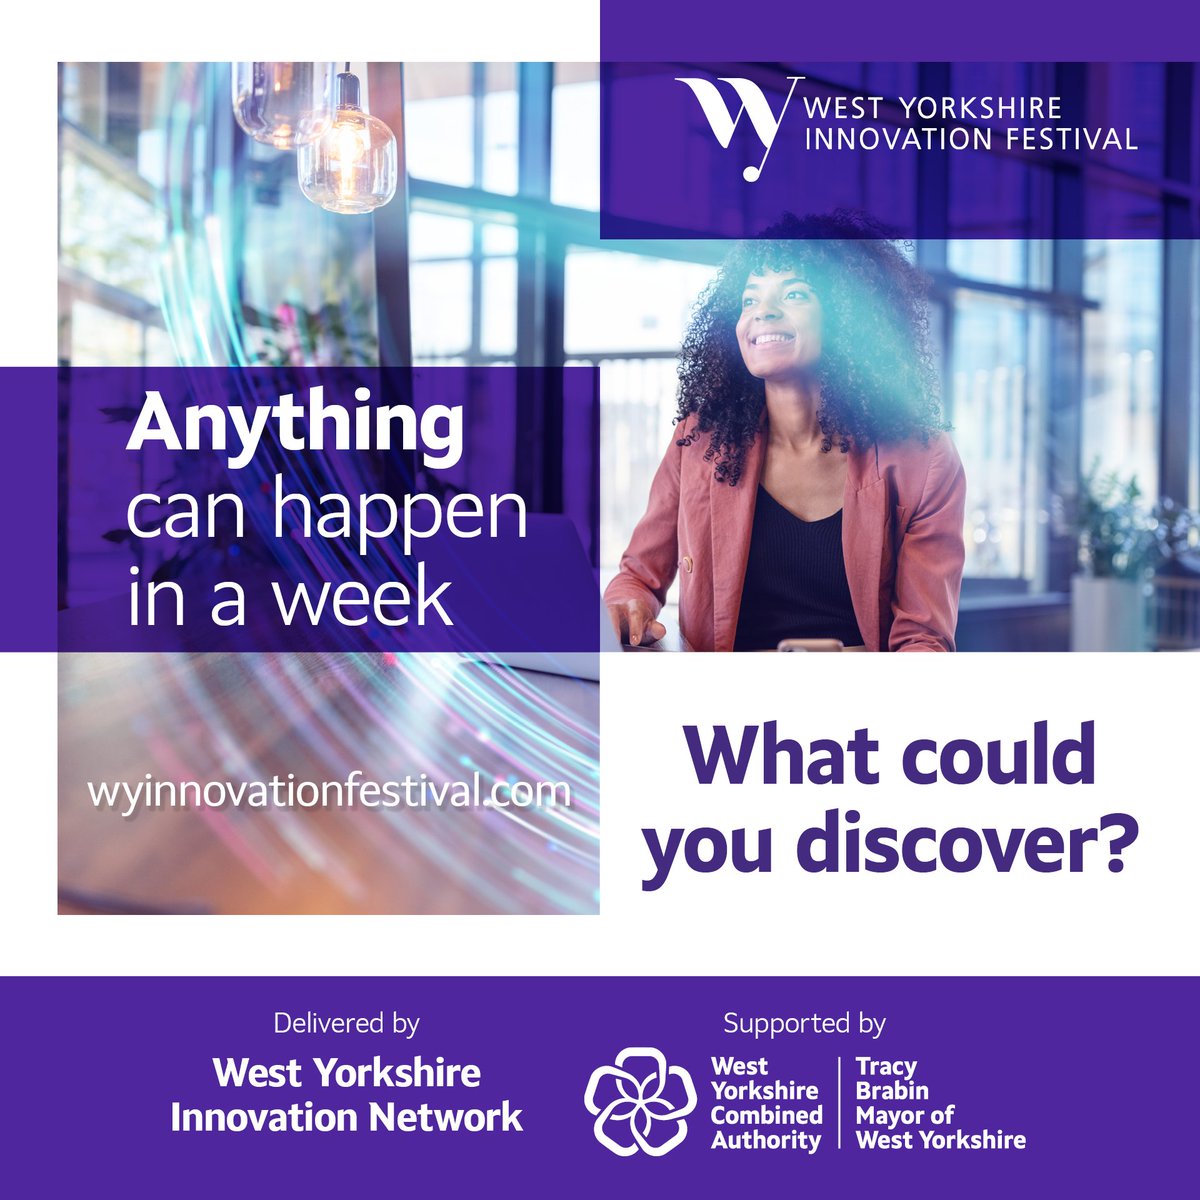 The West Yorkshire Innovation festival is back! Inspire, learn, grow, bring your ideas to life. Book your place on any of the festival events here: wyinnovationfestival.com/events @WestYorkshireCA #sunriseradio #sunriseradiouk #wyinnovationfestival